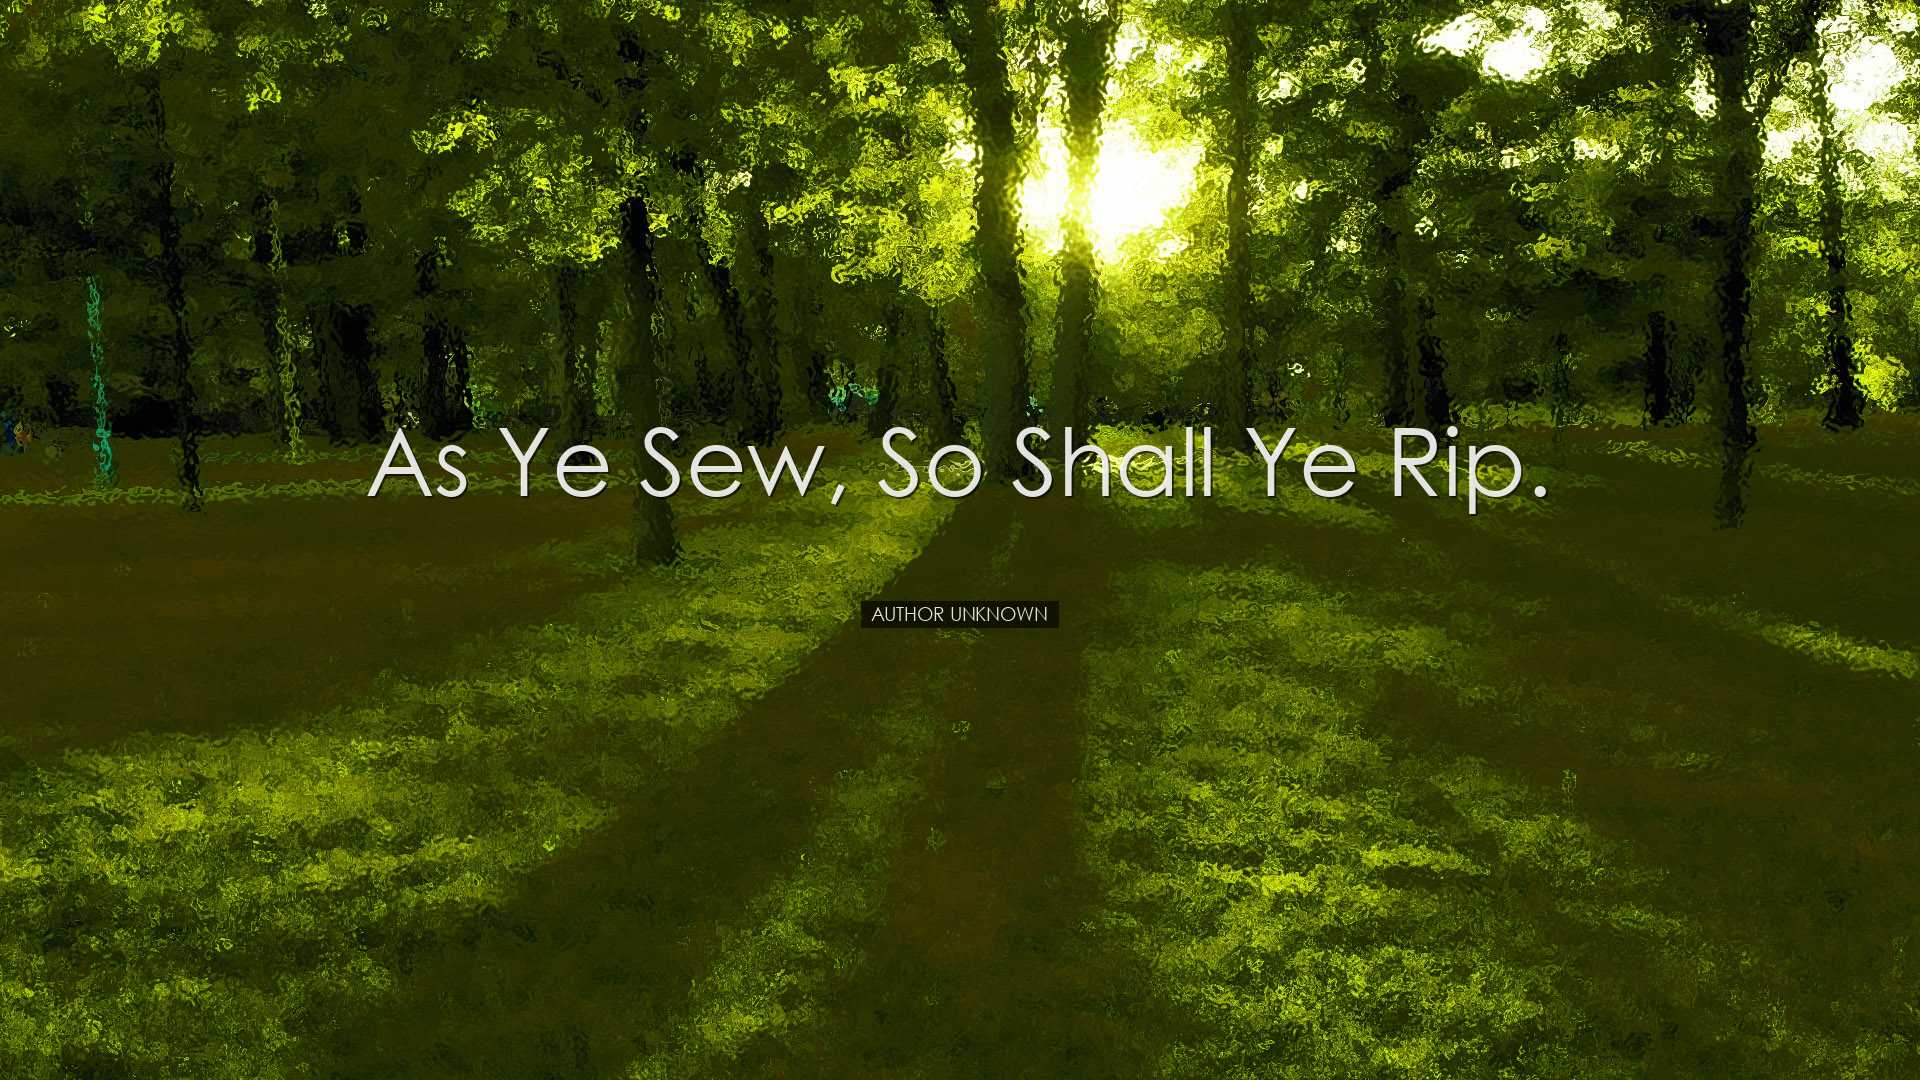 As ye sew, so shall ye rip. - Author Unknown